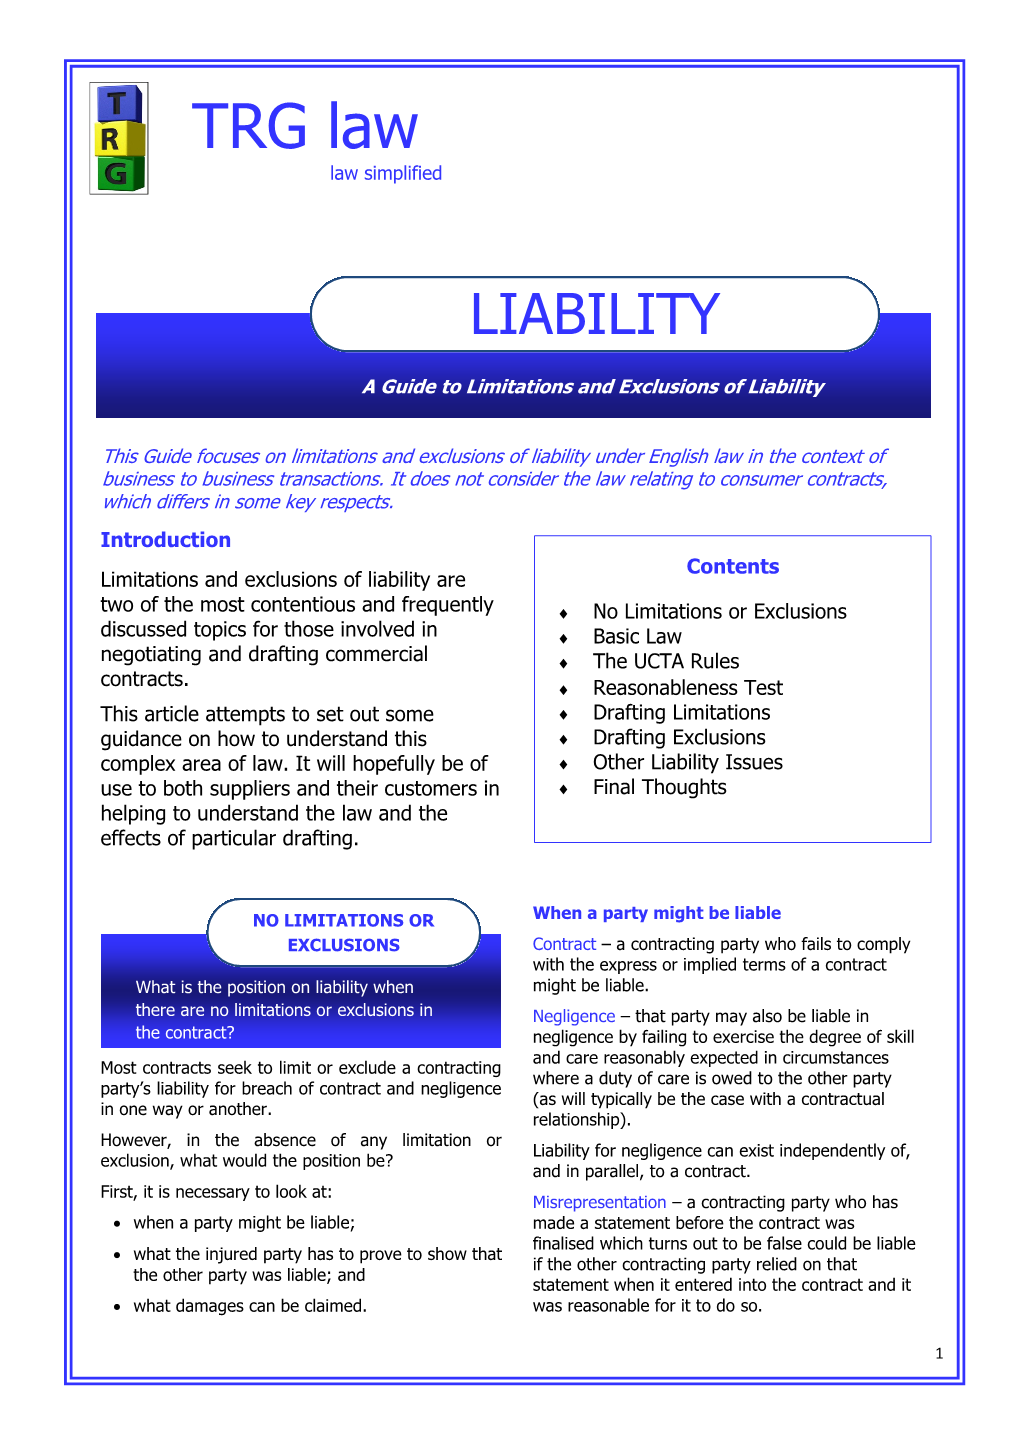 A Guide to Liability Limitations and Exclusions Sept 2011